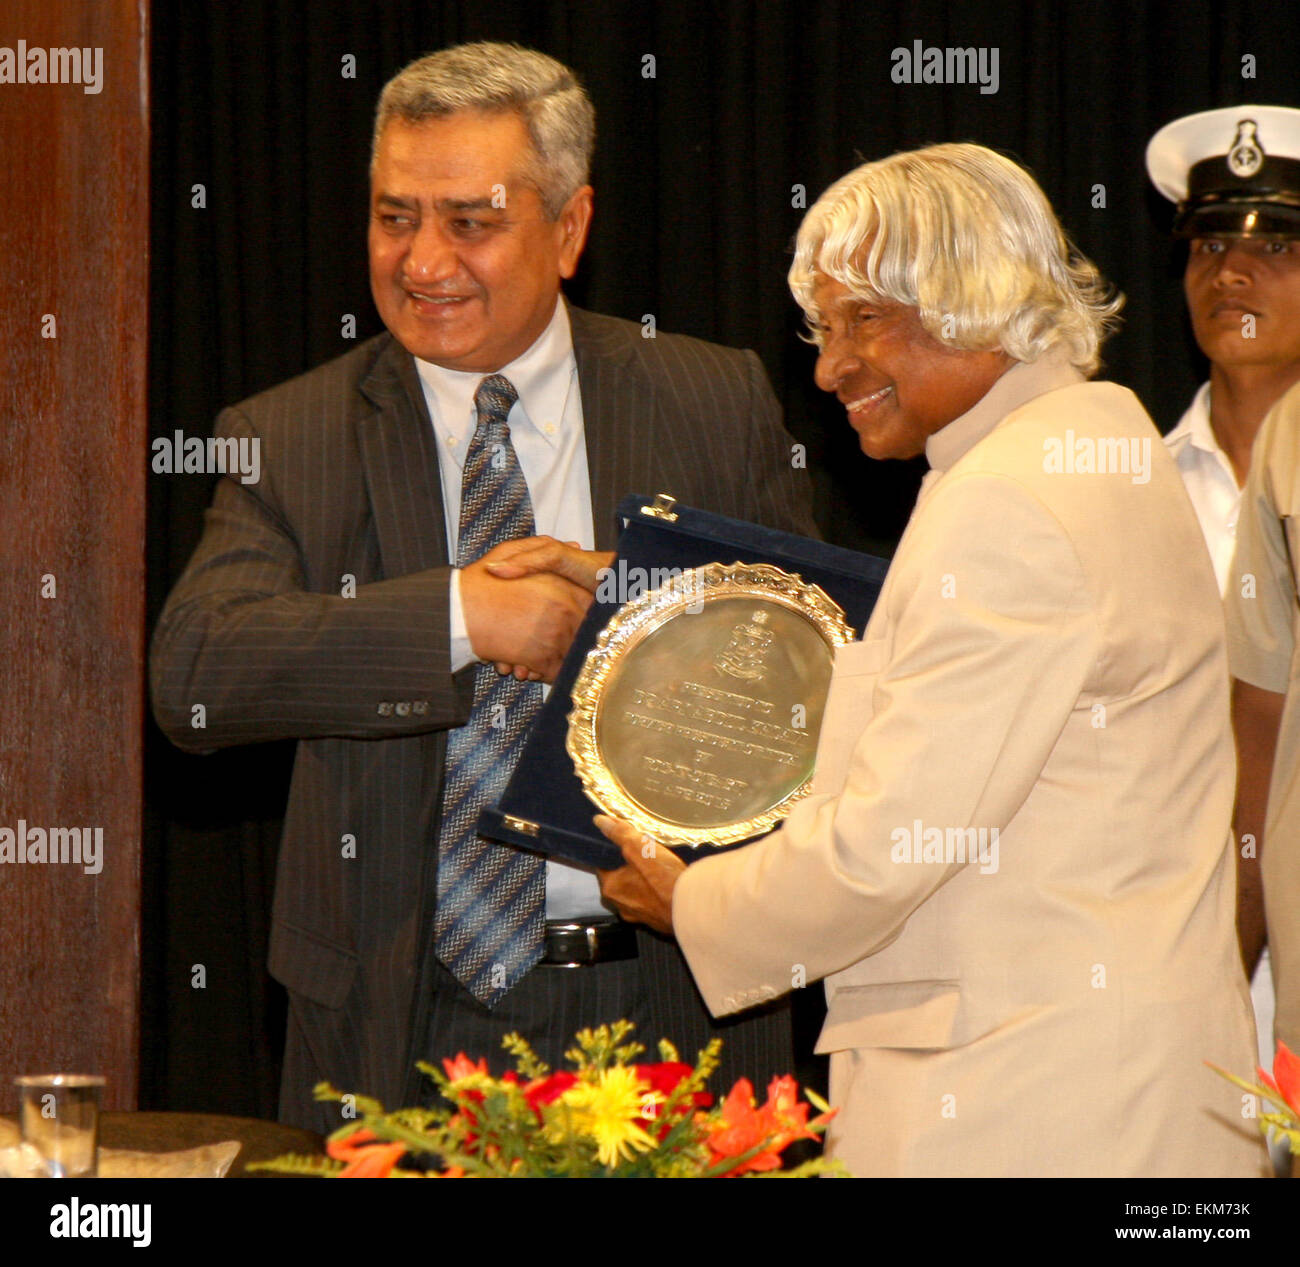 Dr. APJ Abdul Kalam, Former President of India receiving Memento from Vice Admiral Satish Soni, FOC-in-C, Eastern Naval Command at the 5th Admiral AK Chatterji Memorial Lecture at Bhasha Bhavan, National Library on Sunday. Stock Photo